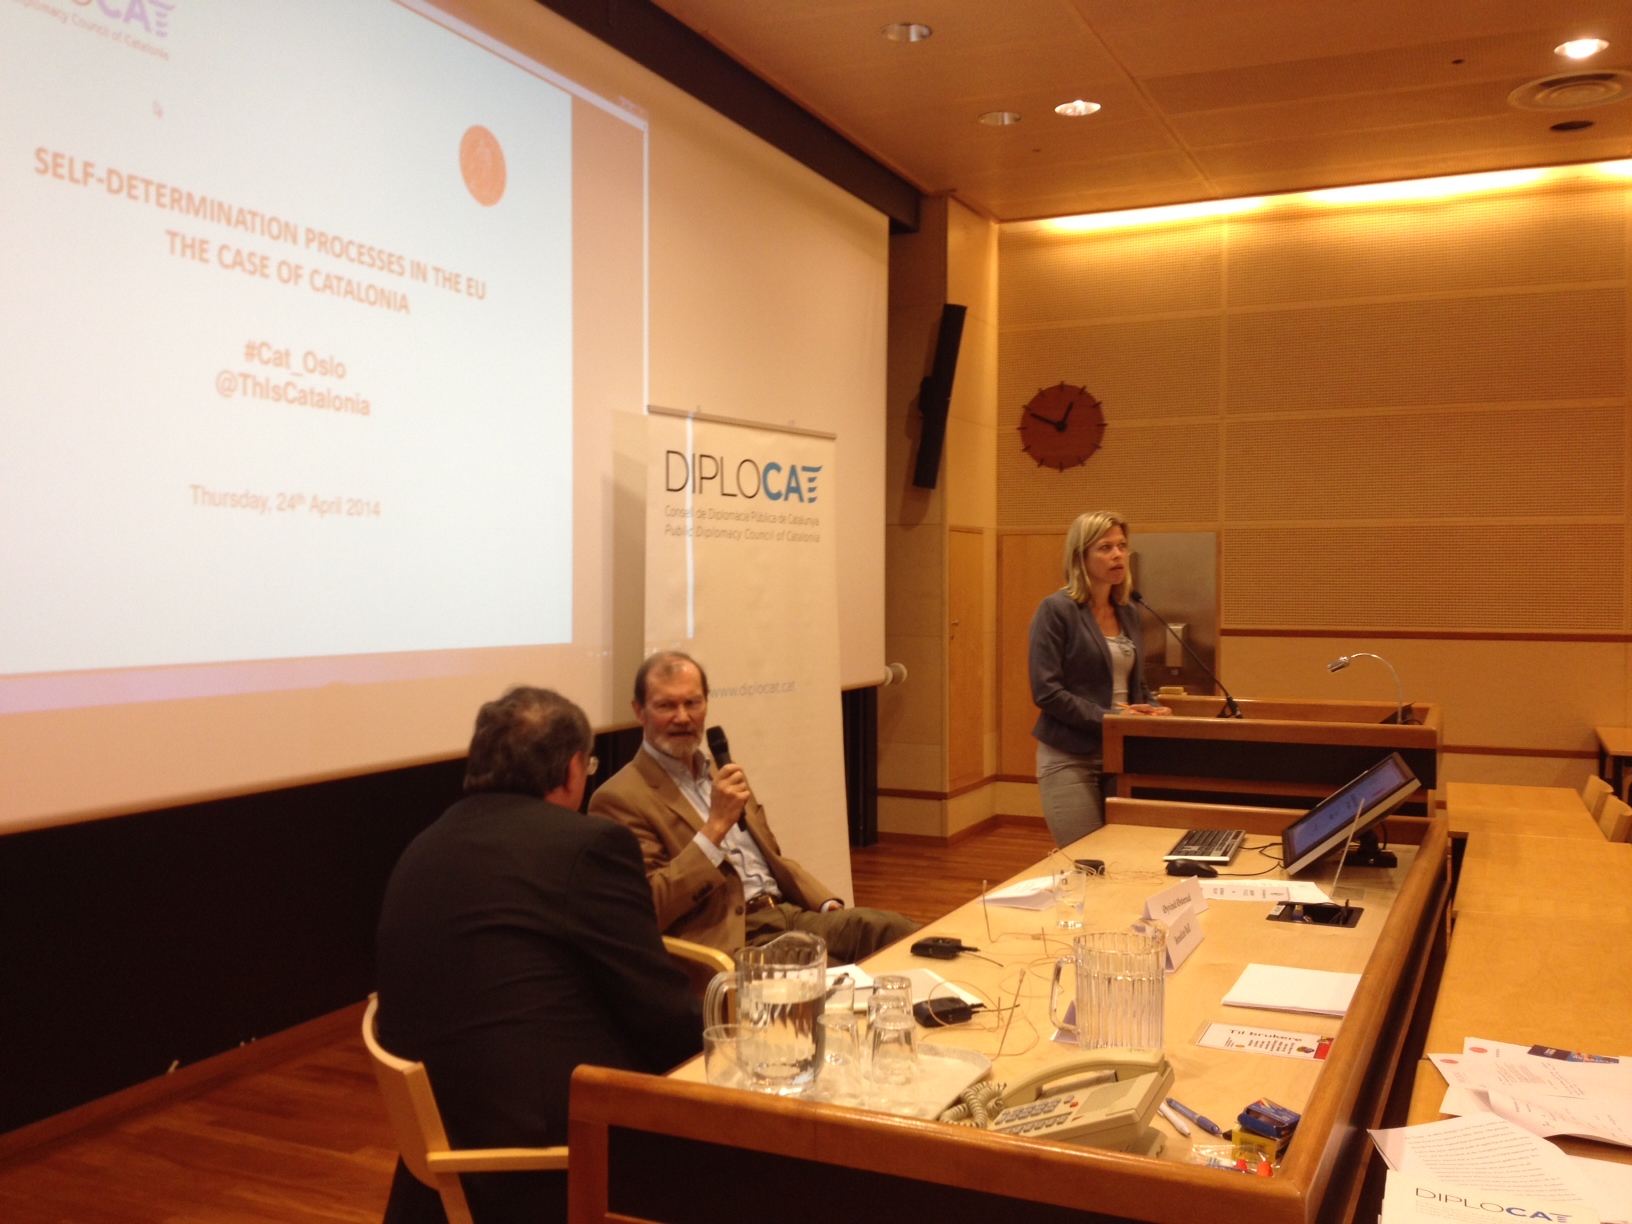 An image of the debate held on Thursday at the University of Oslo (by Diplocat)